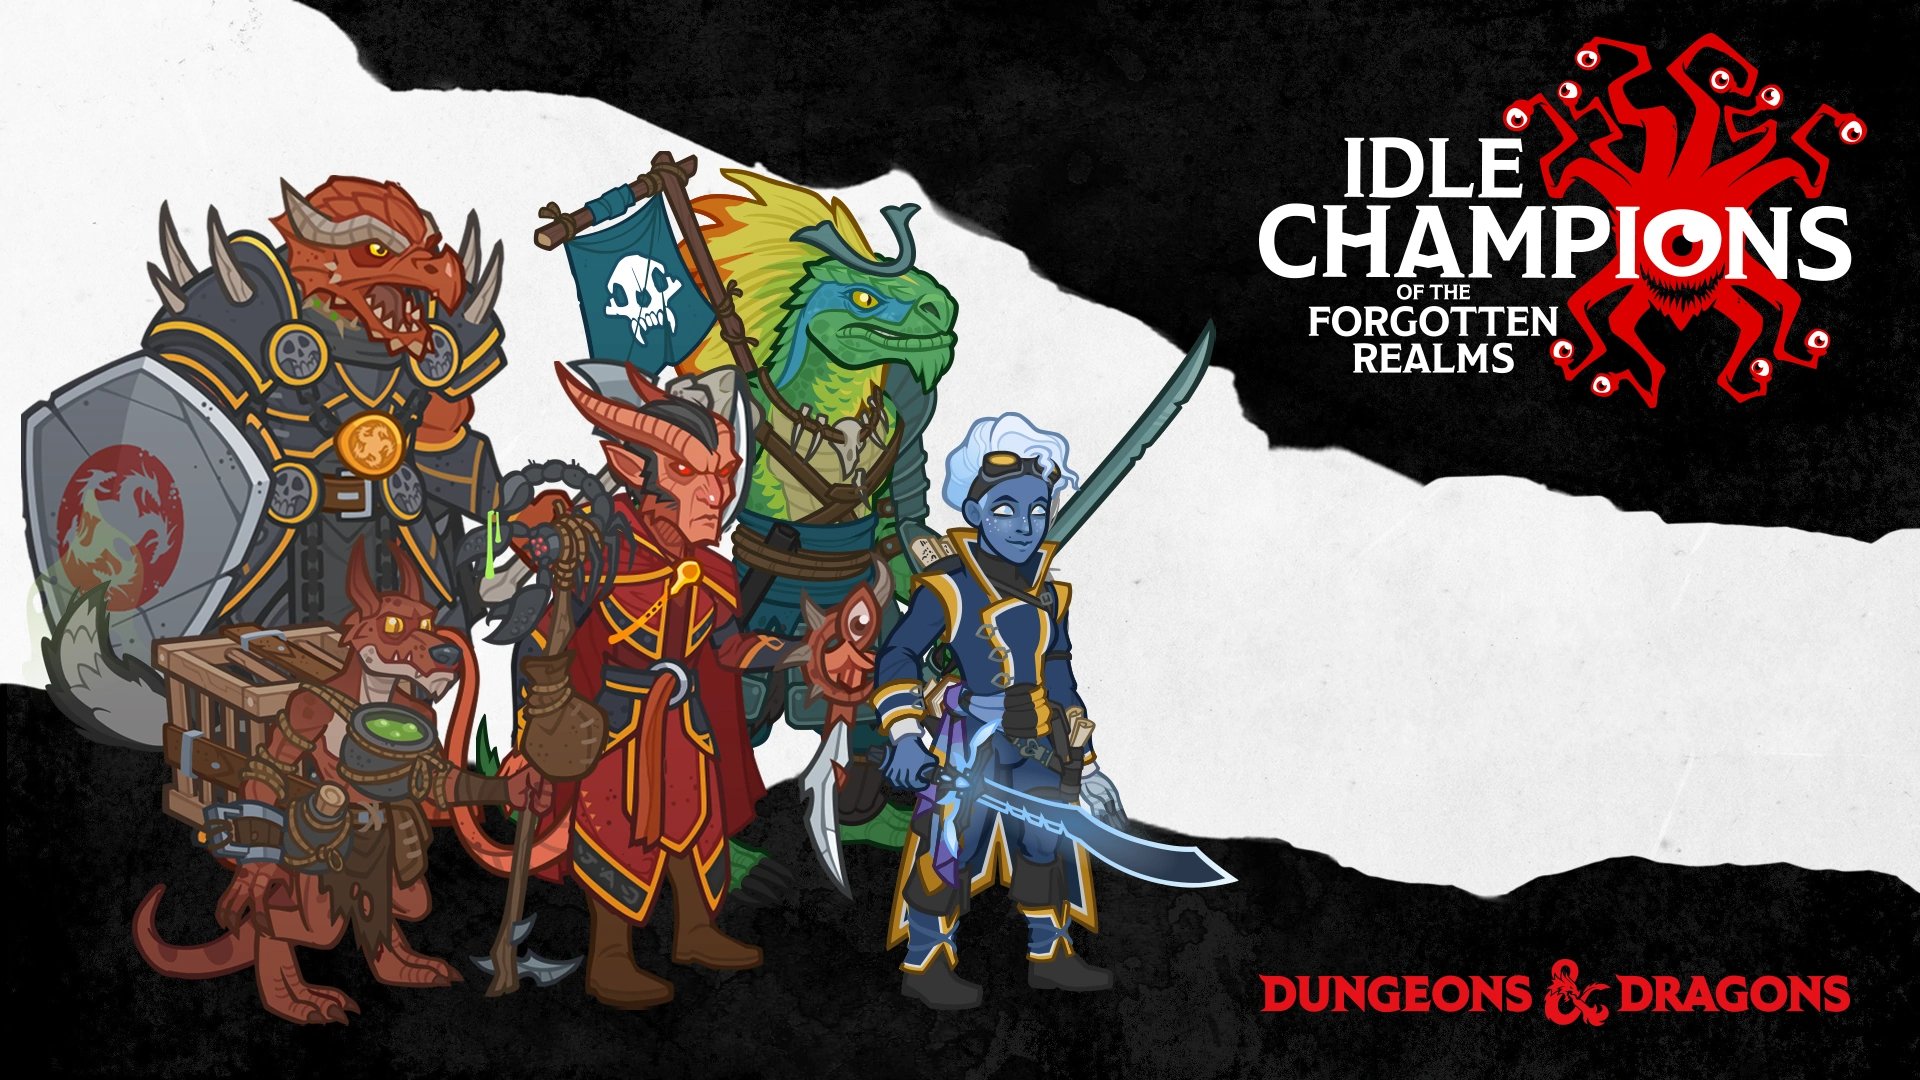 idle champions of the forgotten realms wallpaper